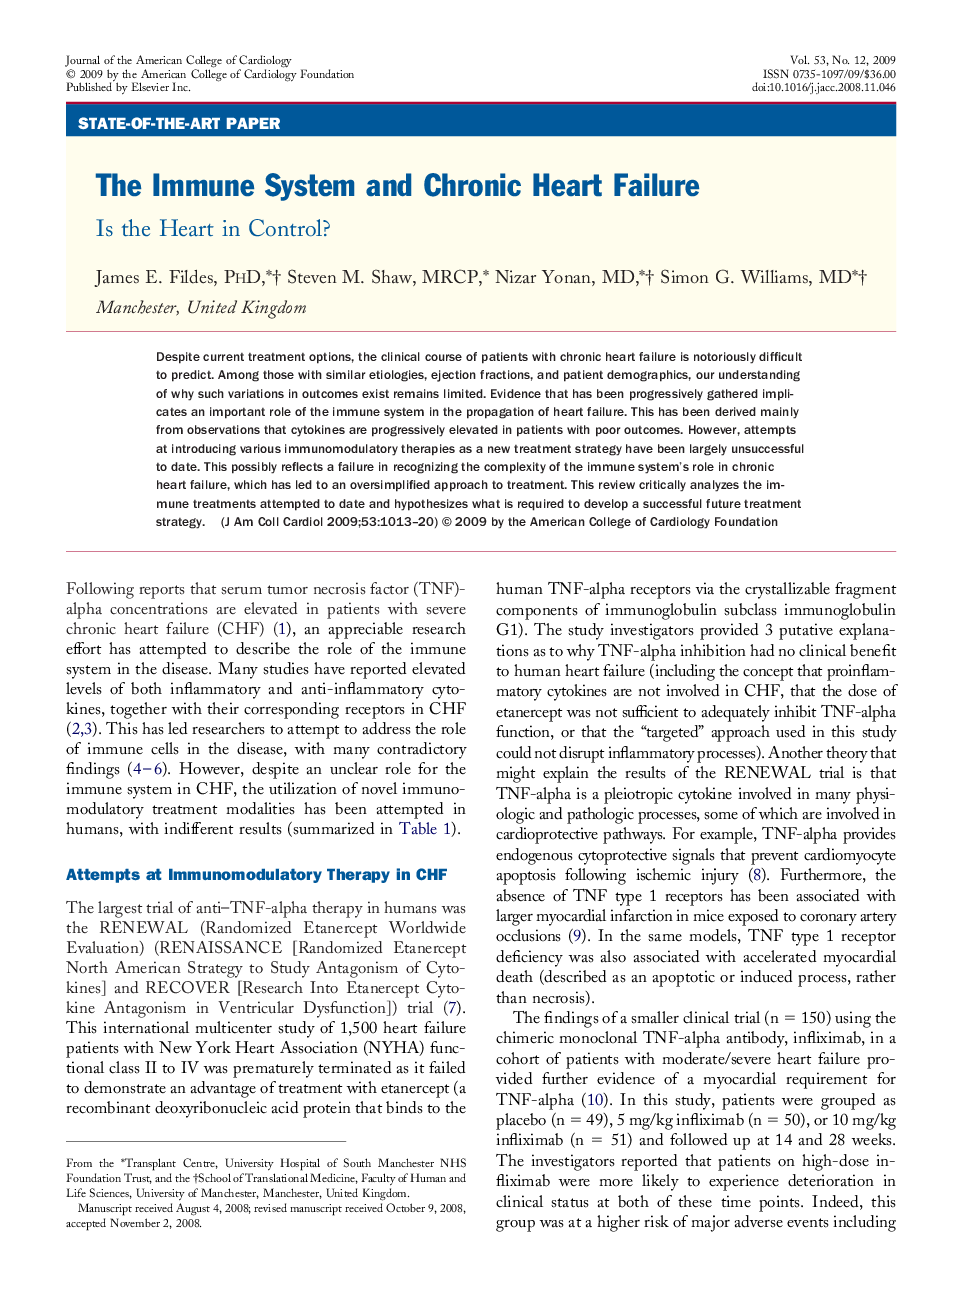 The Immune System and Chronic Heart Failure: Is the Heart in Control?